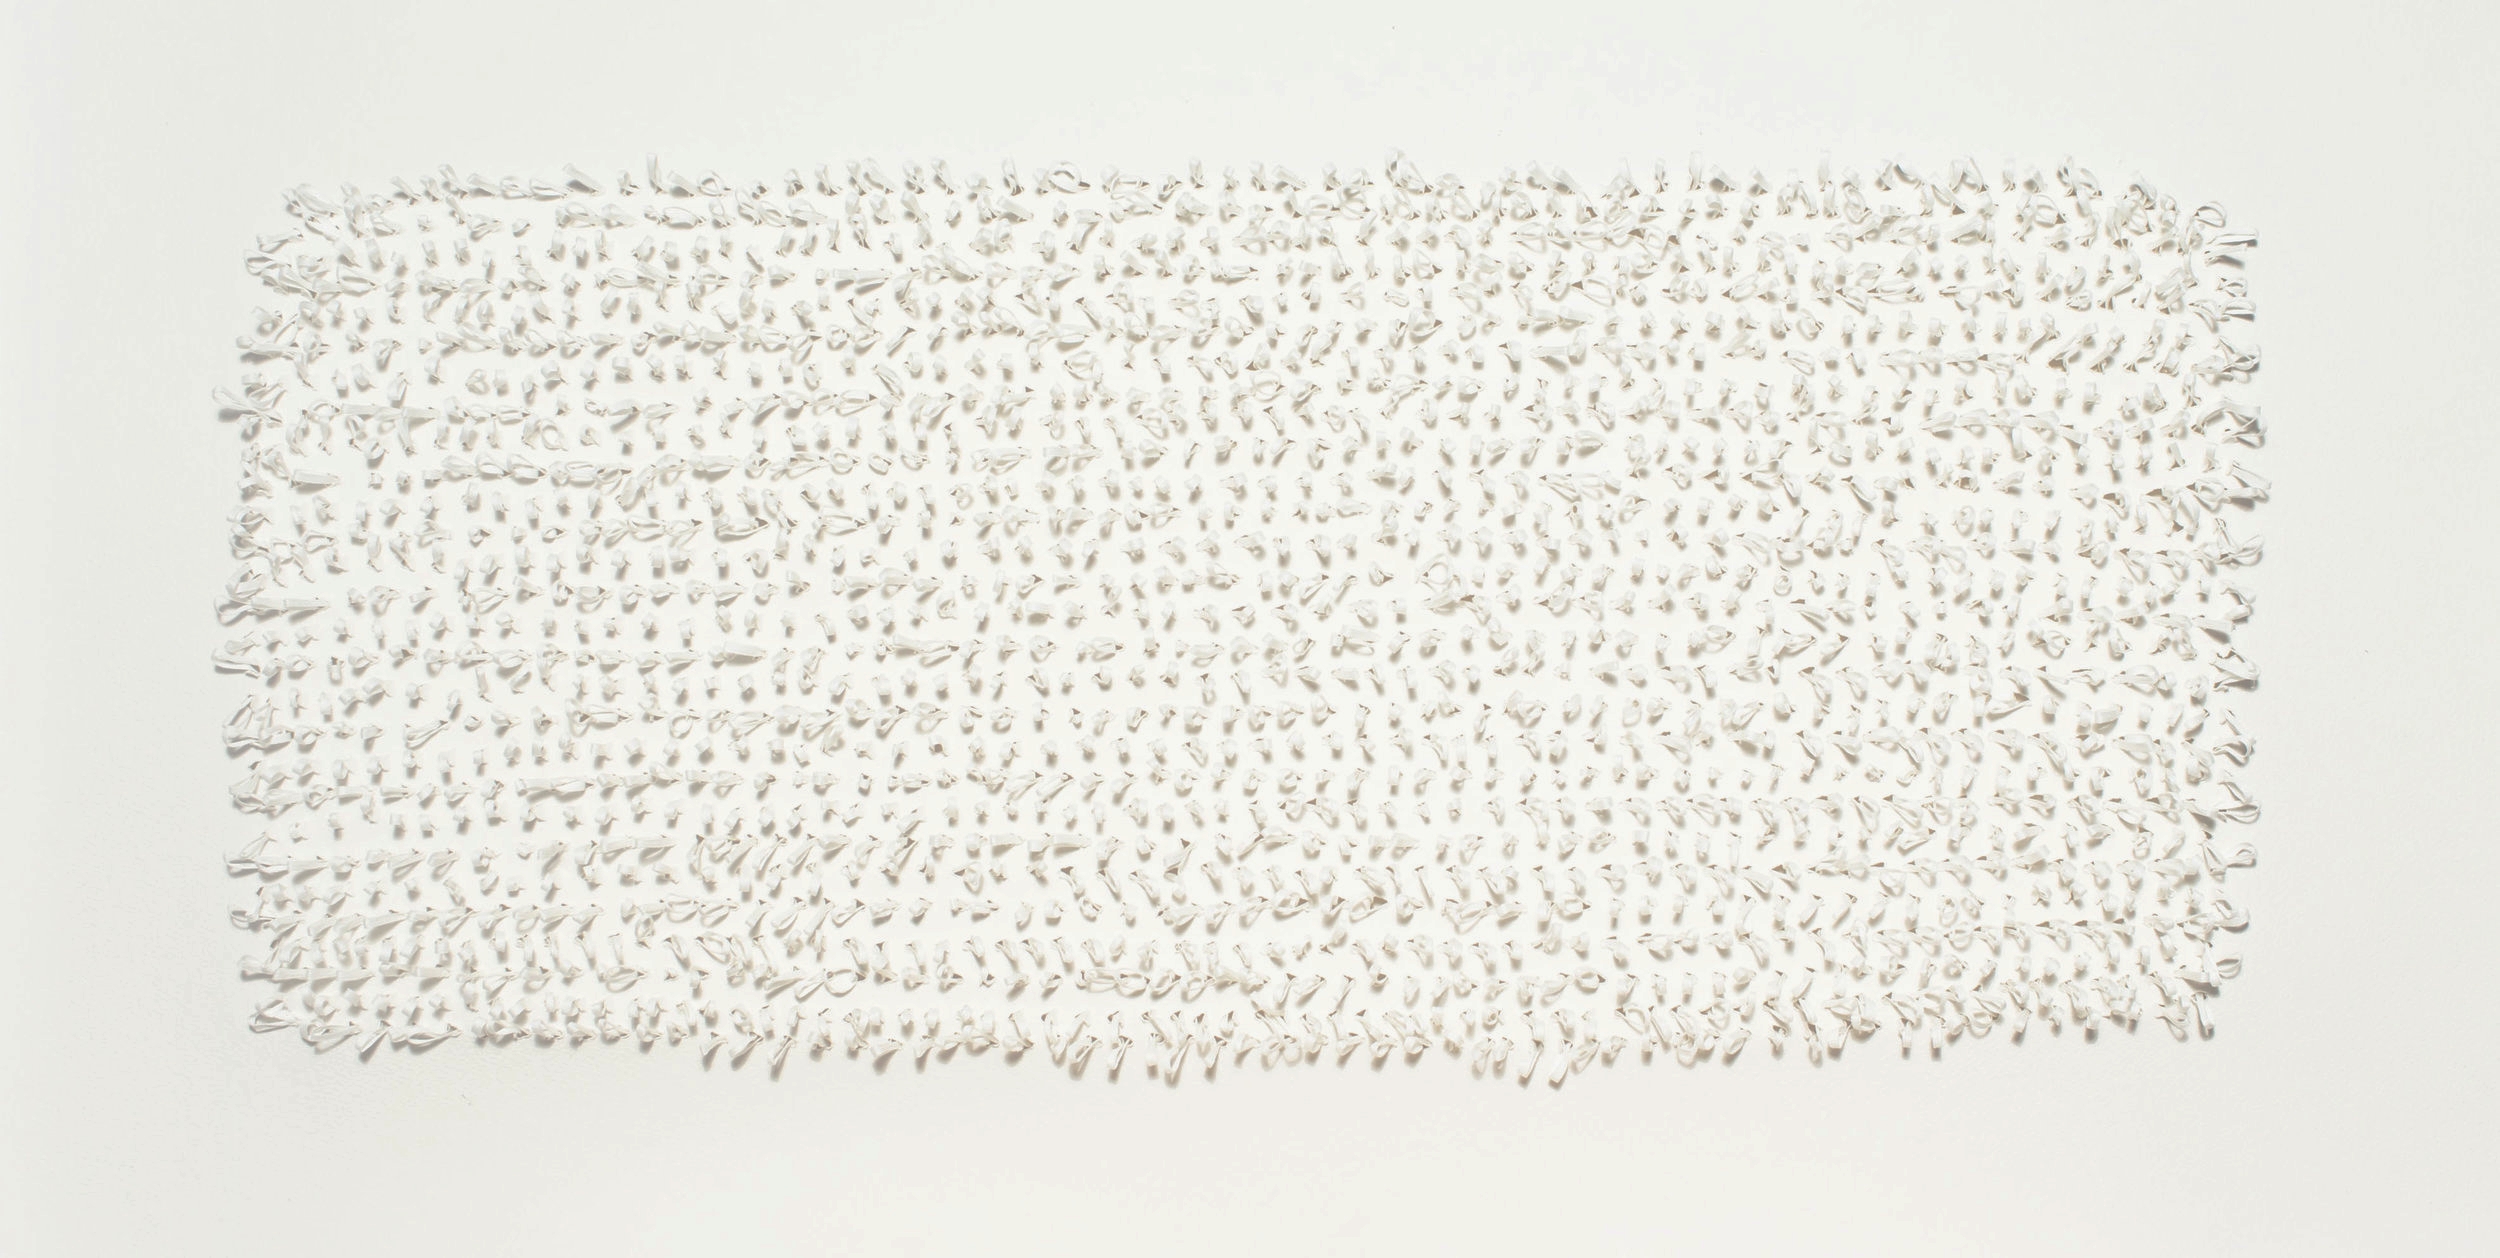  Tufting is a technique traditionally used through open weave fabric for rug making. These 3 dimensional wall pieces are created using the same tufting form through cotton paper.  yarn : cotton gima 